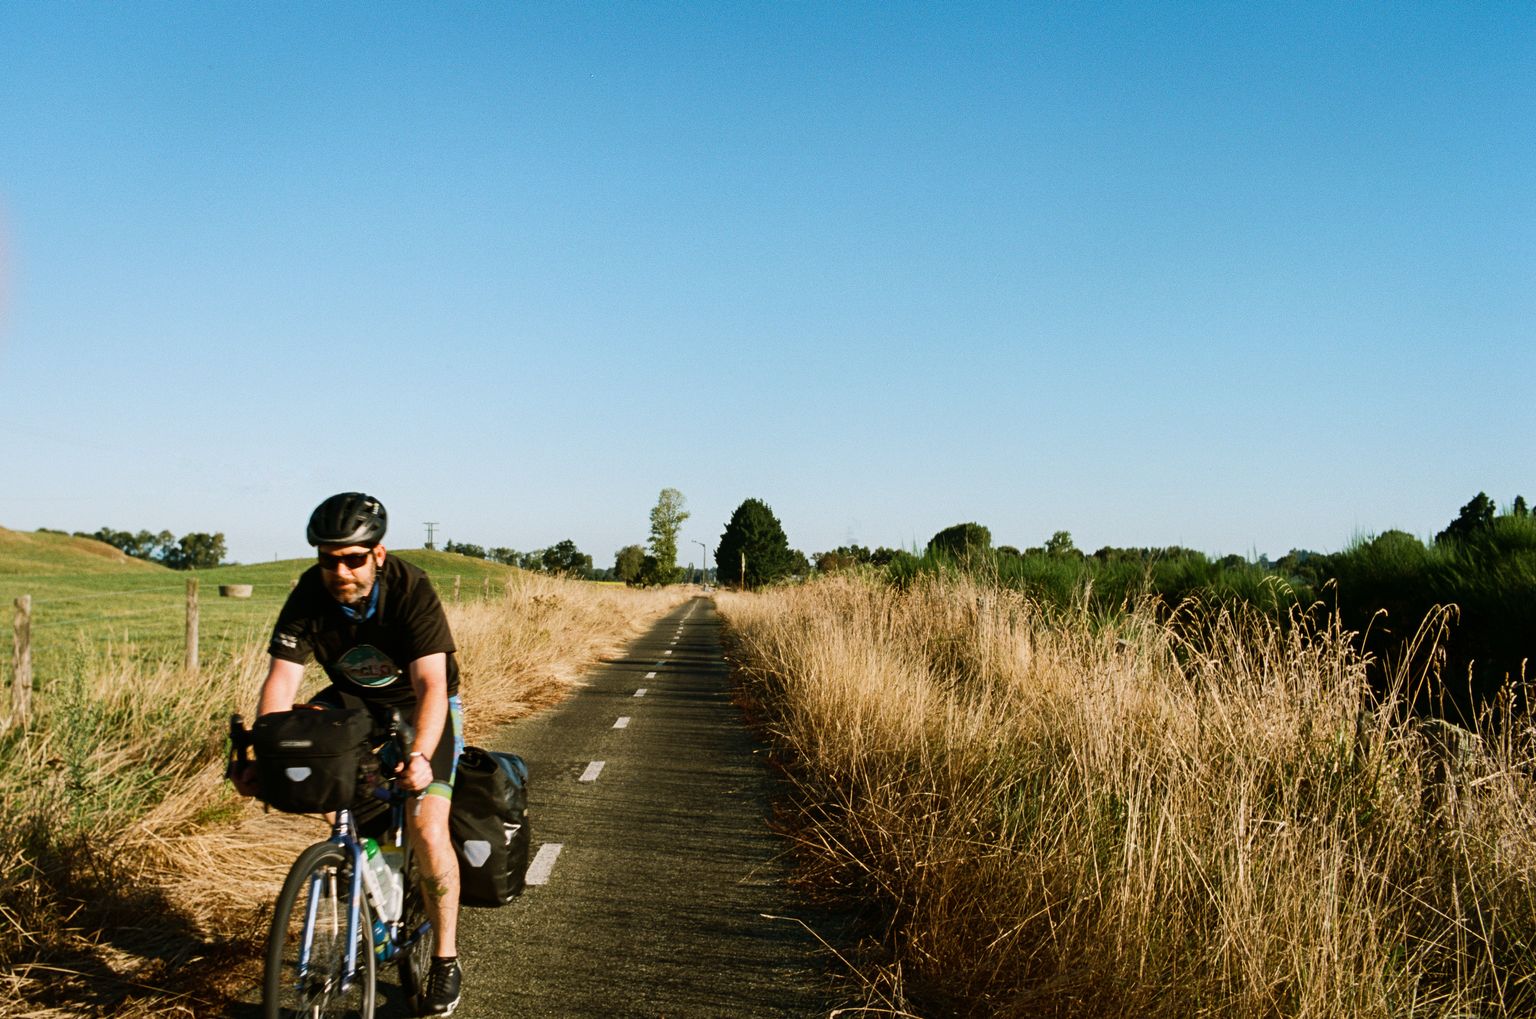 Jeb rides by on a cycle path nestled between rows of tall grass next to a green pasture in rural North Island, New Zealand.